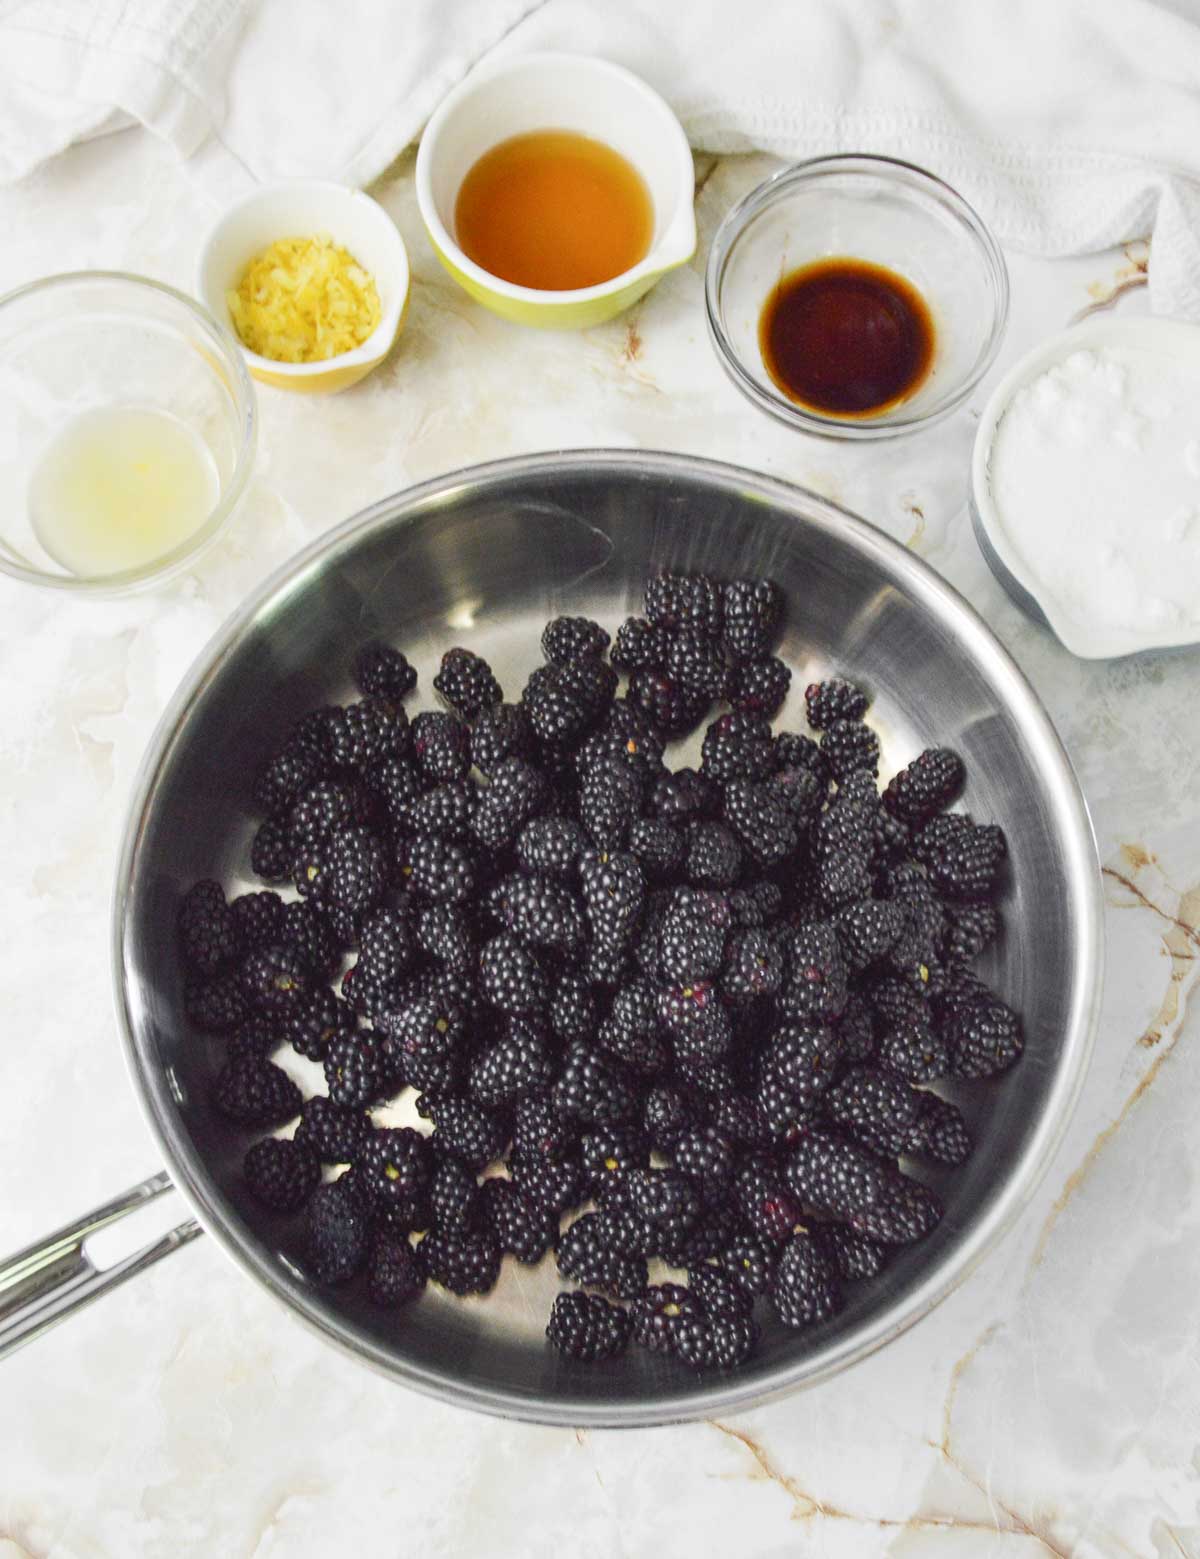 Ingredients to make blackberry jam with bourbon..